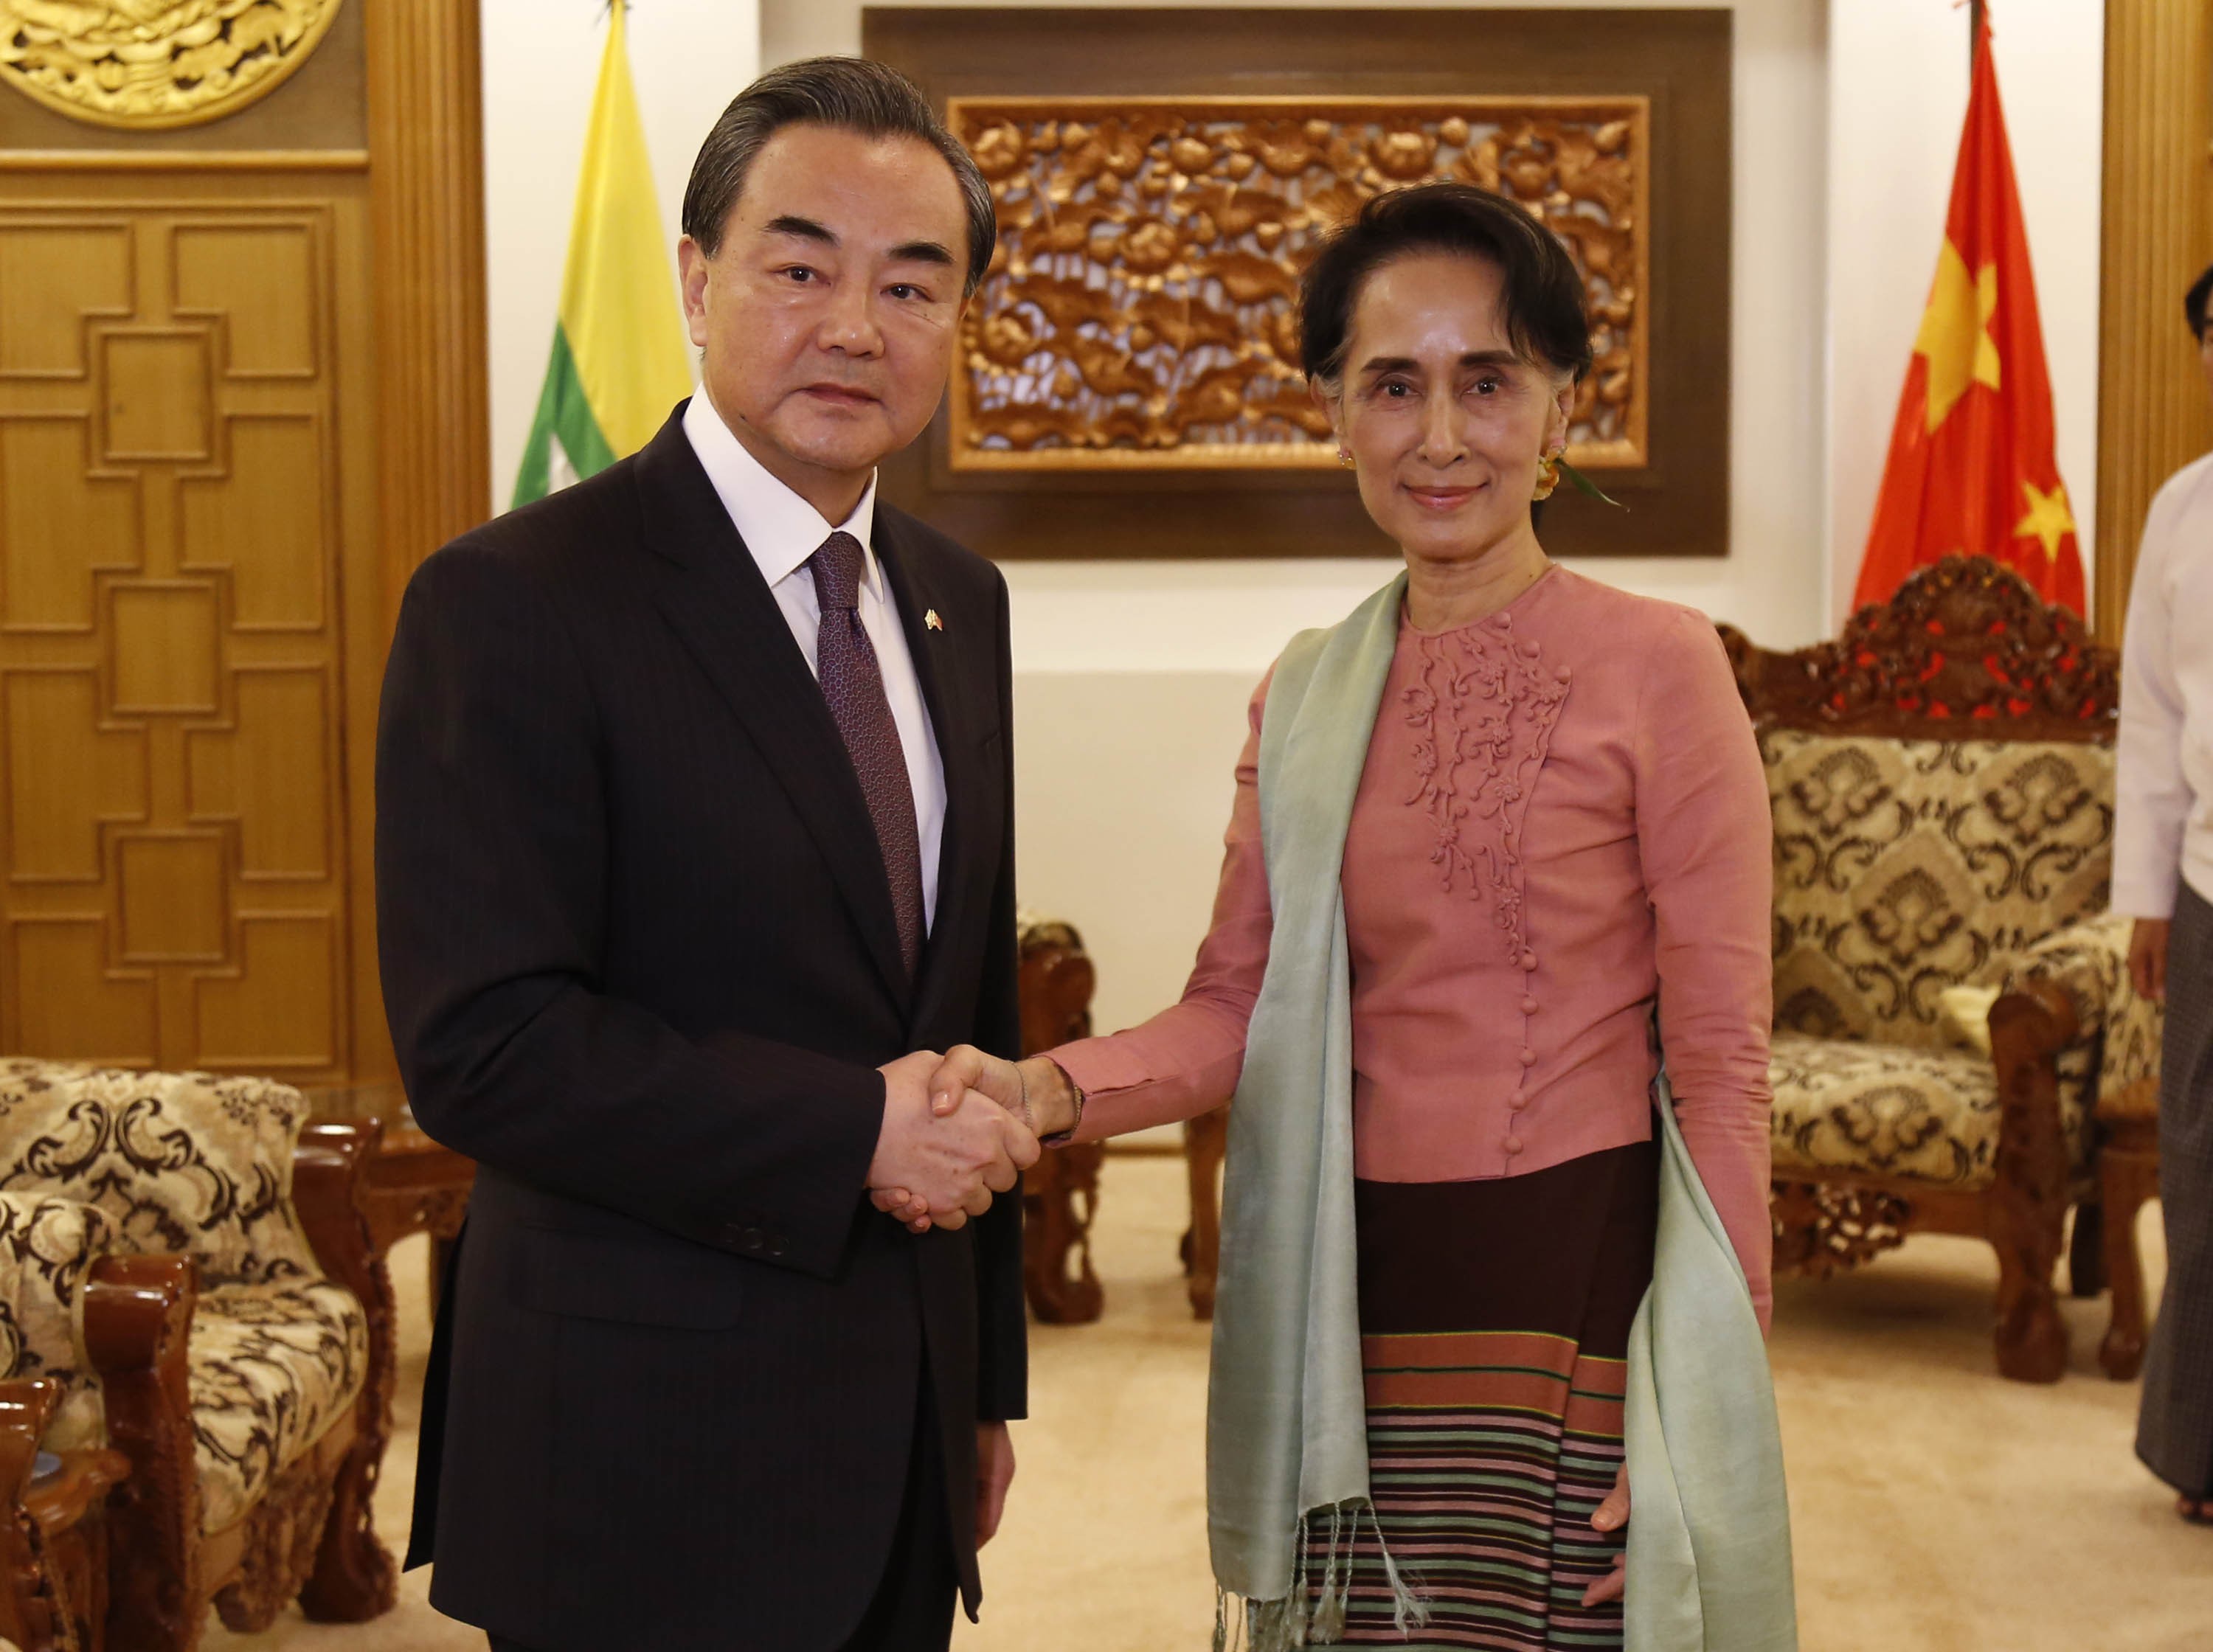 Chinese Foreign Minister Wang Yi shakes hands with Myanmar's Aung San Suu Kyi in Naypyidaw, Myanmar, in April 2016. Photo: Xinhua